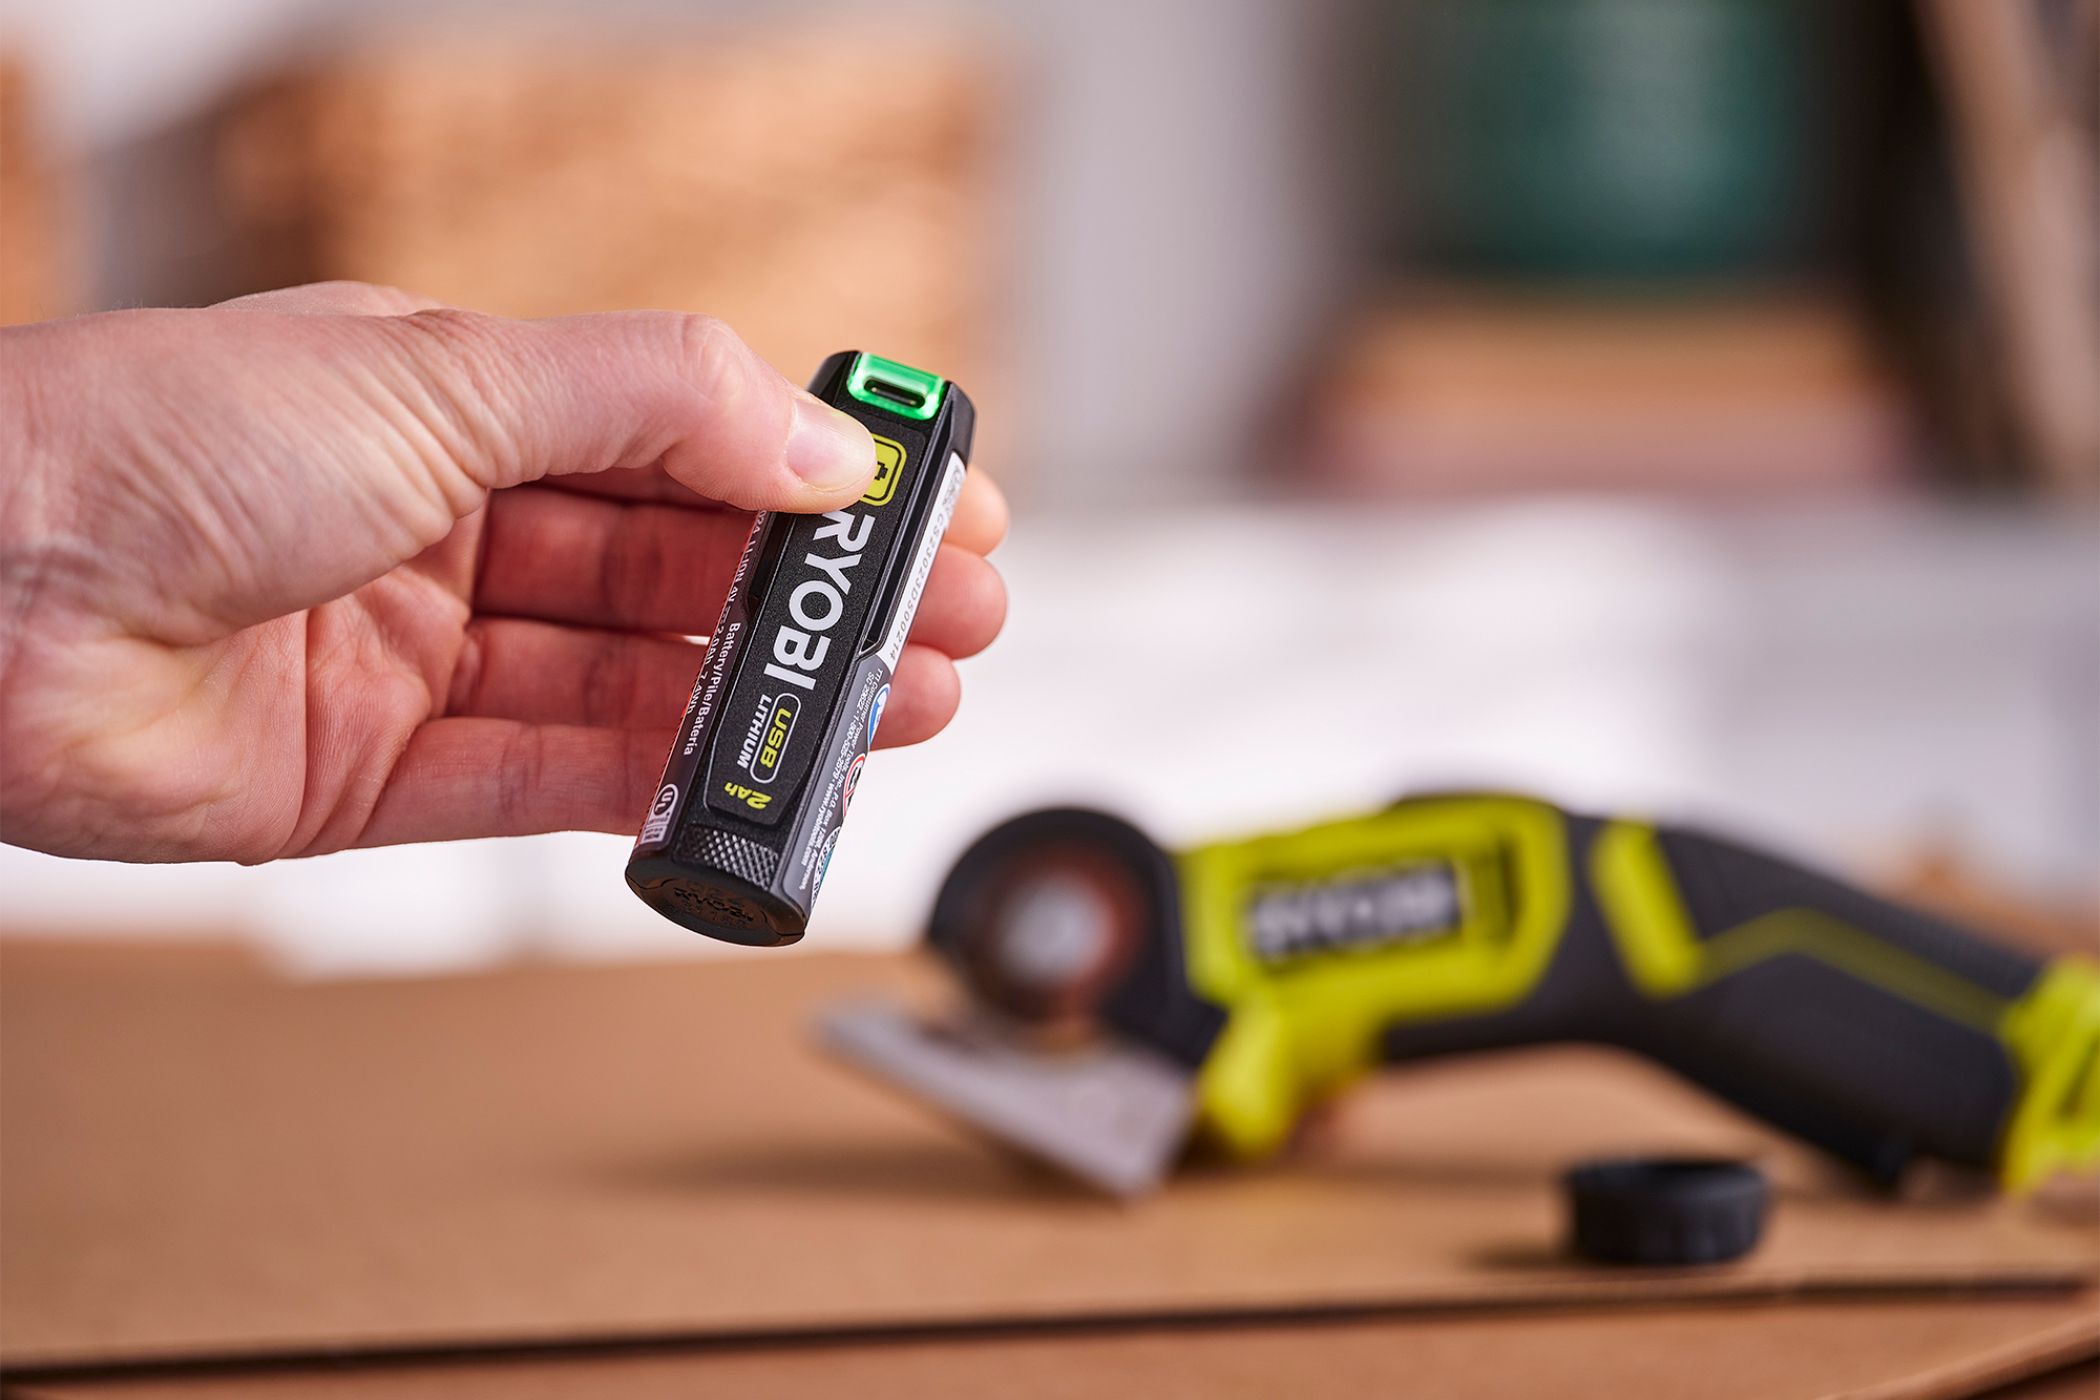 How to Use the RYOBI USB Lithium Foam Cutter 